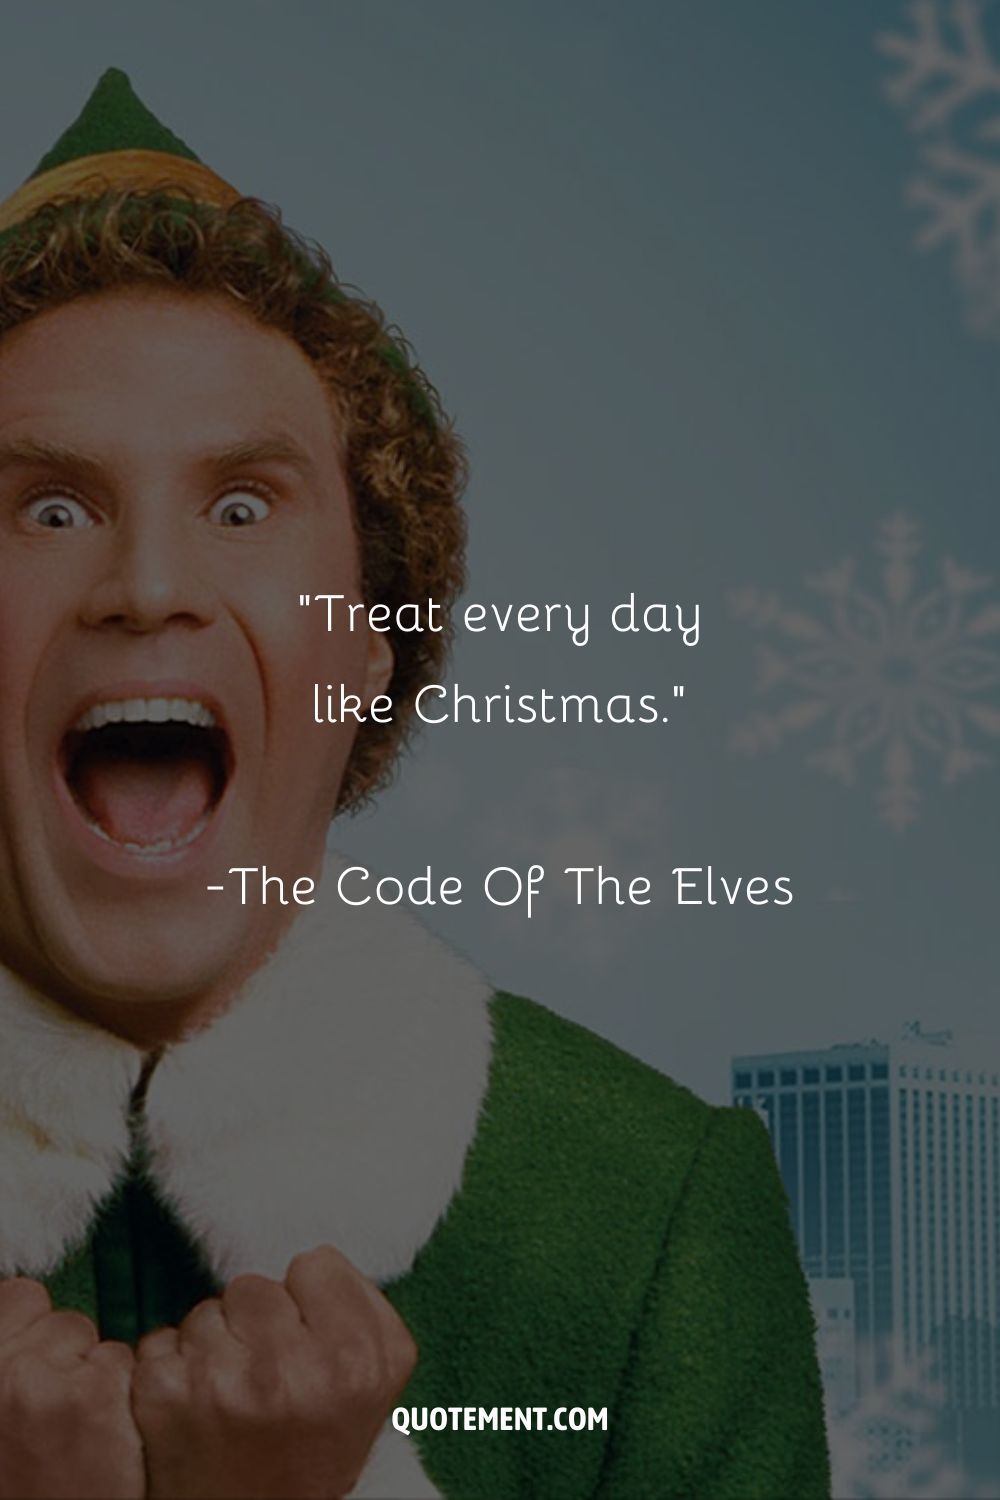 Image of Buddy the Elf representing the best Elf quote.